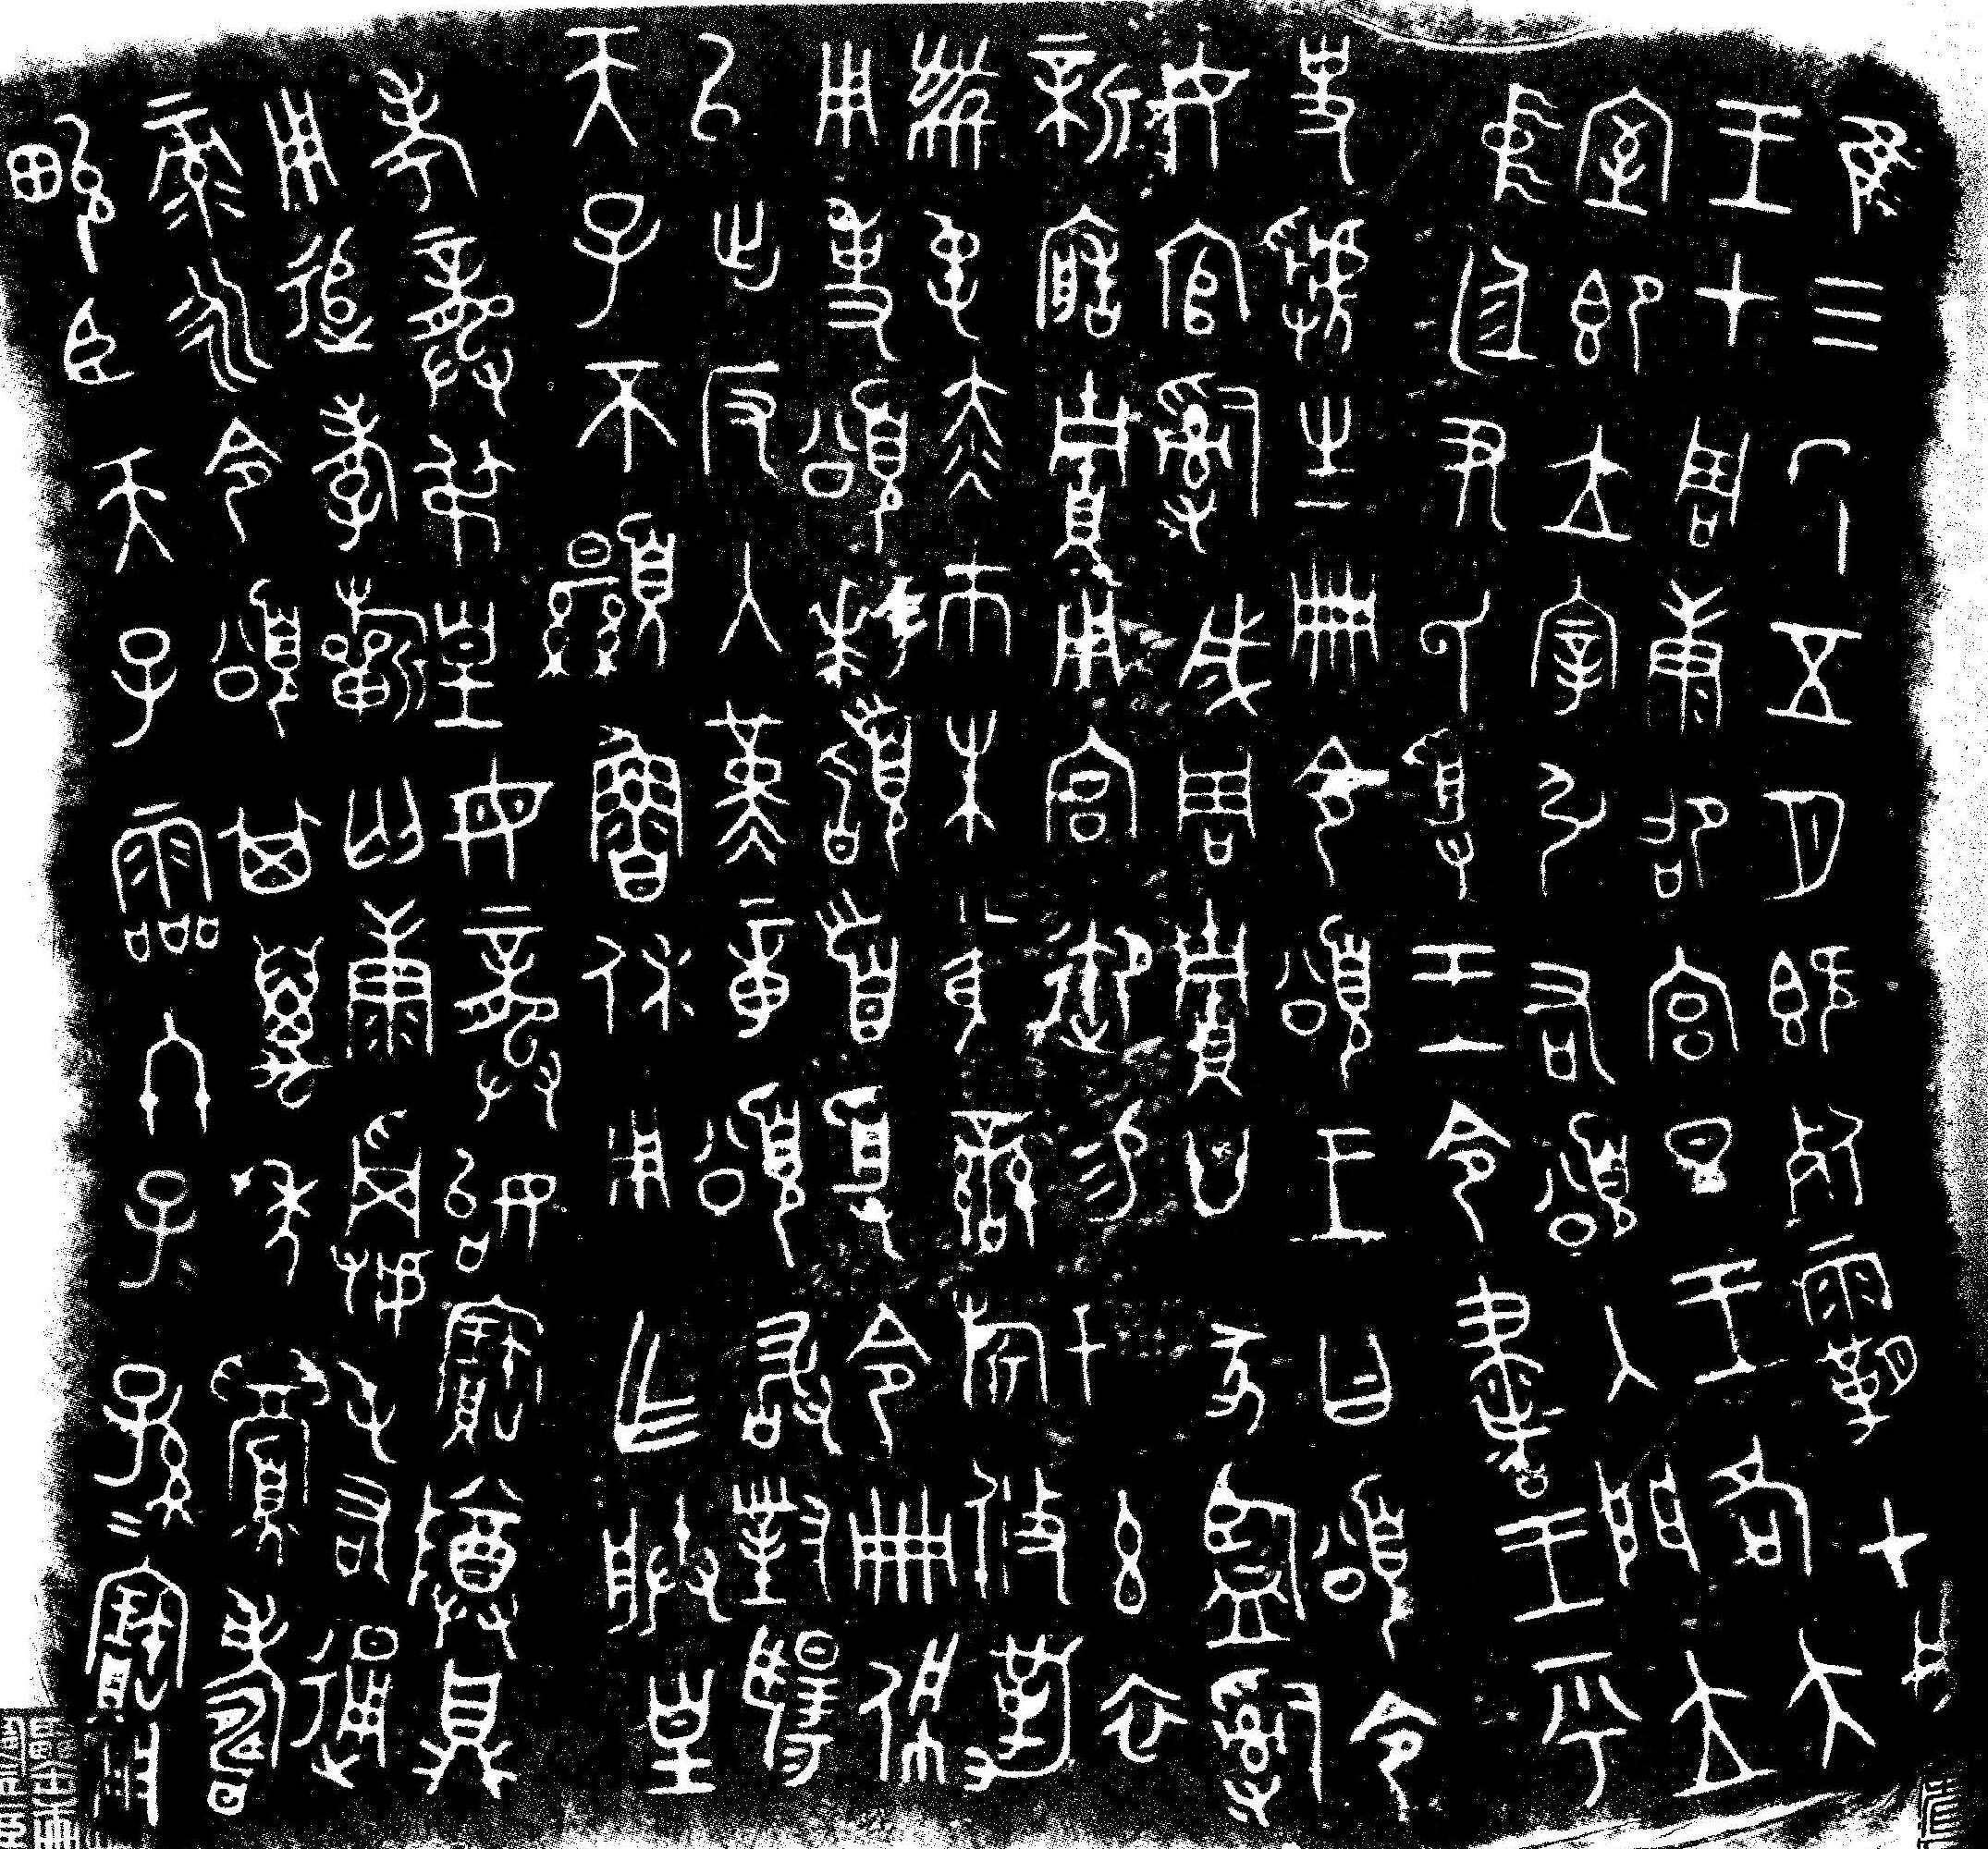 A crop of a rubbing of a bronze bowl shows Chinese characters including a mark to indicate duplication of the preceding character.